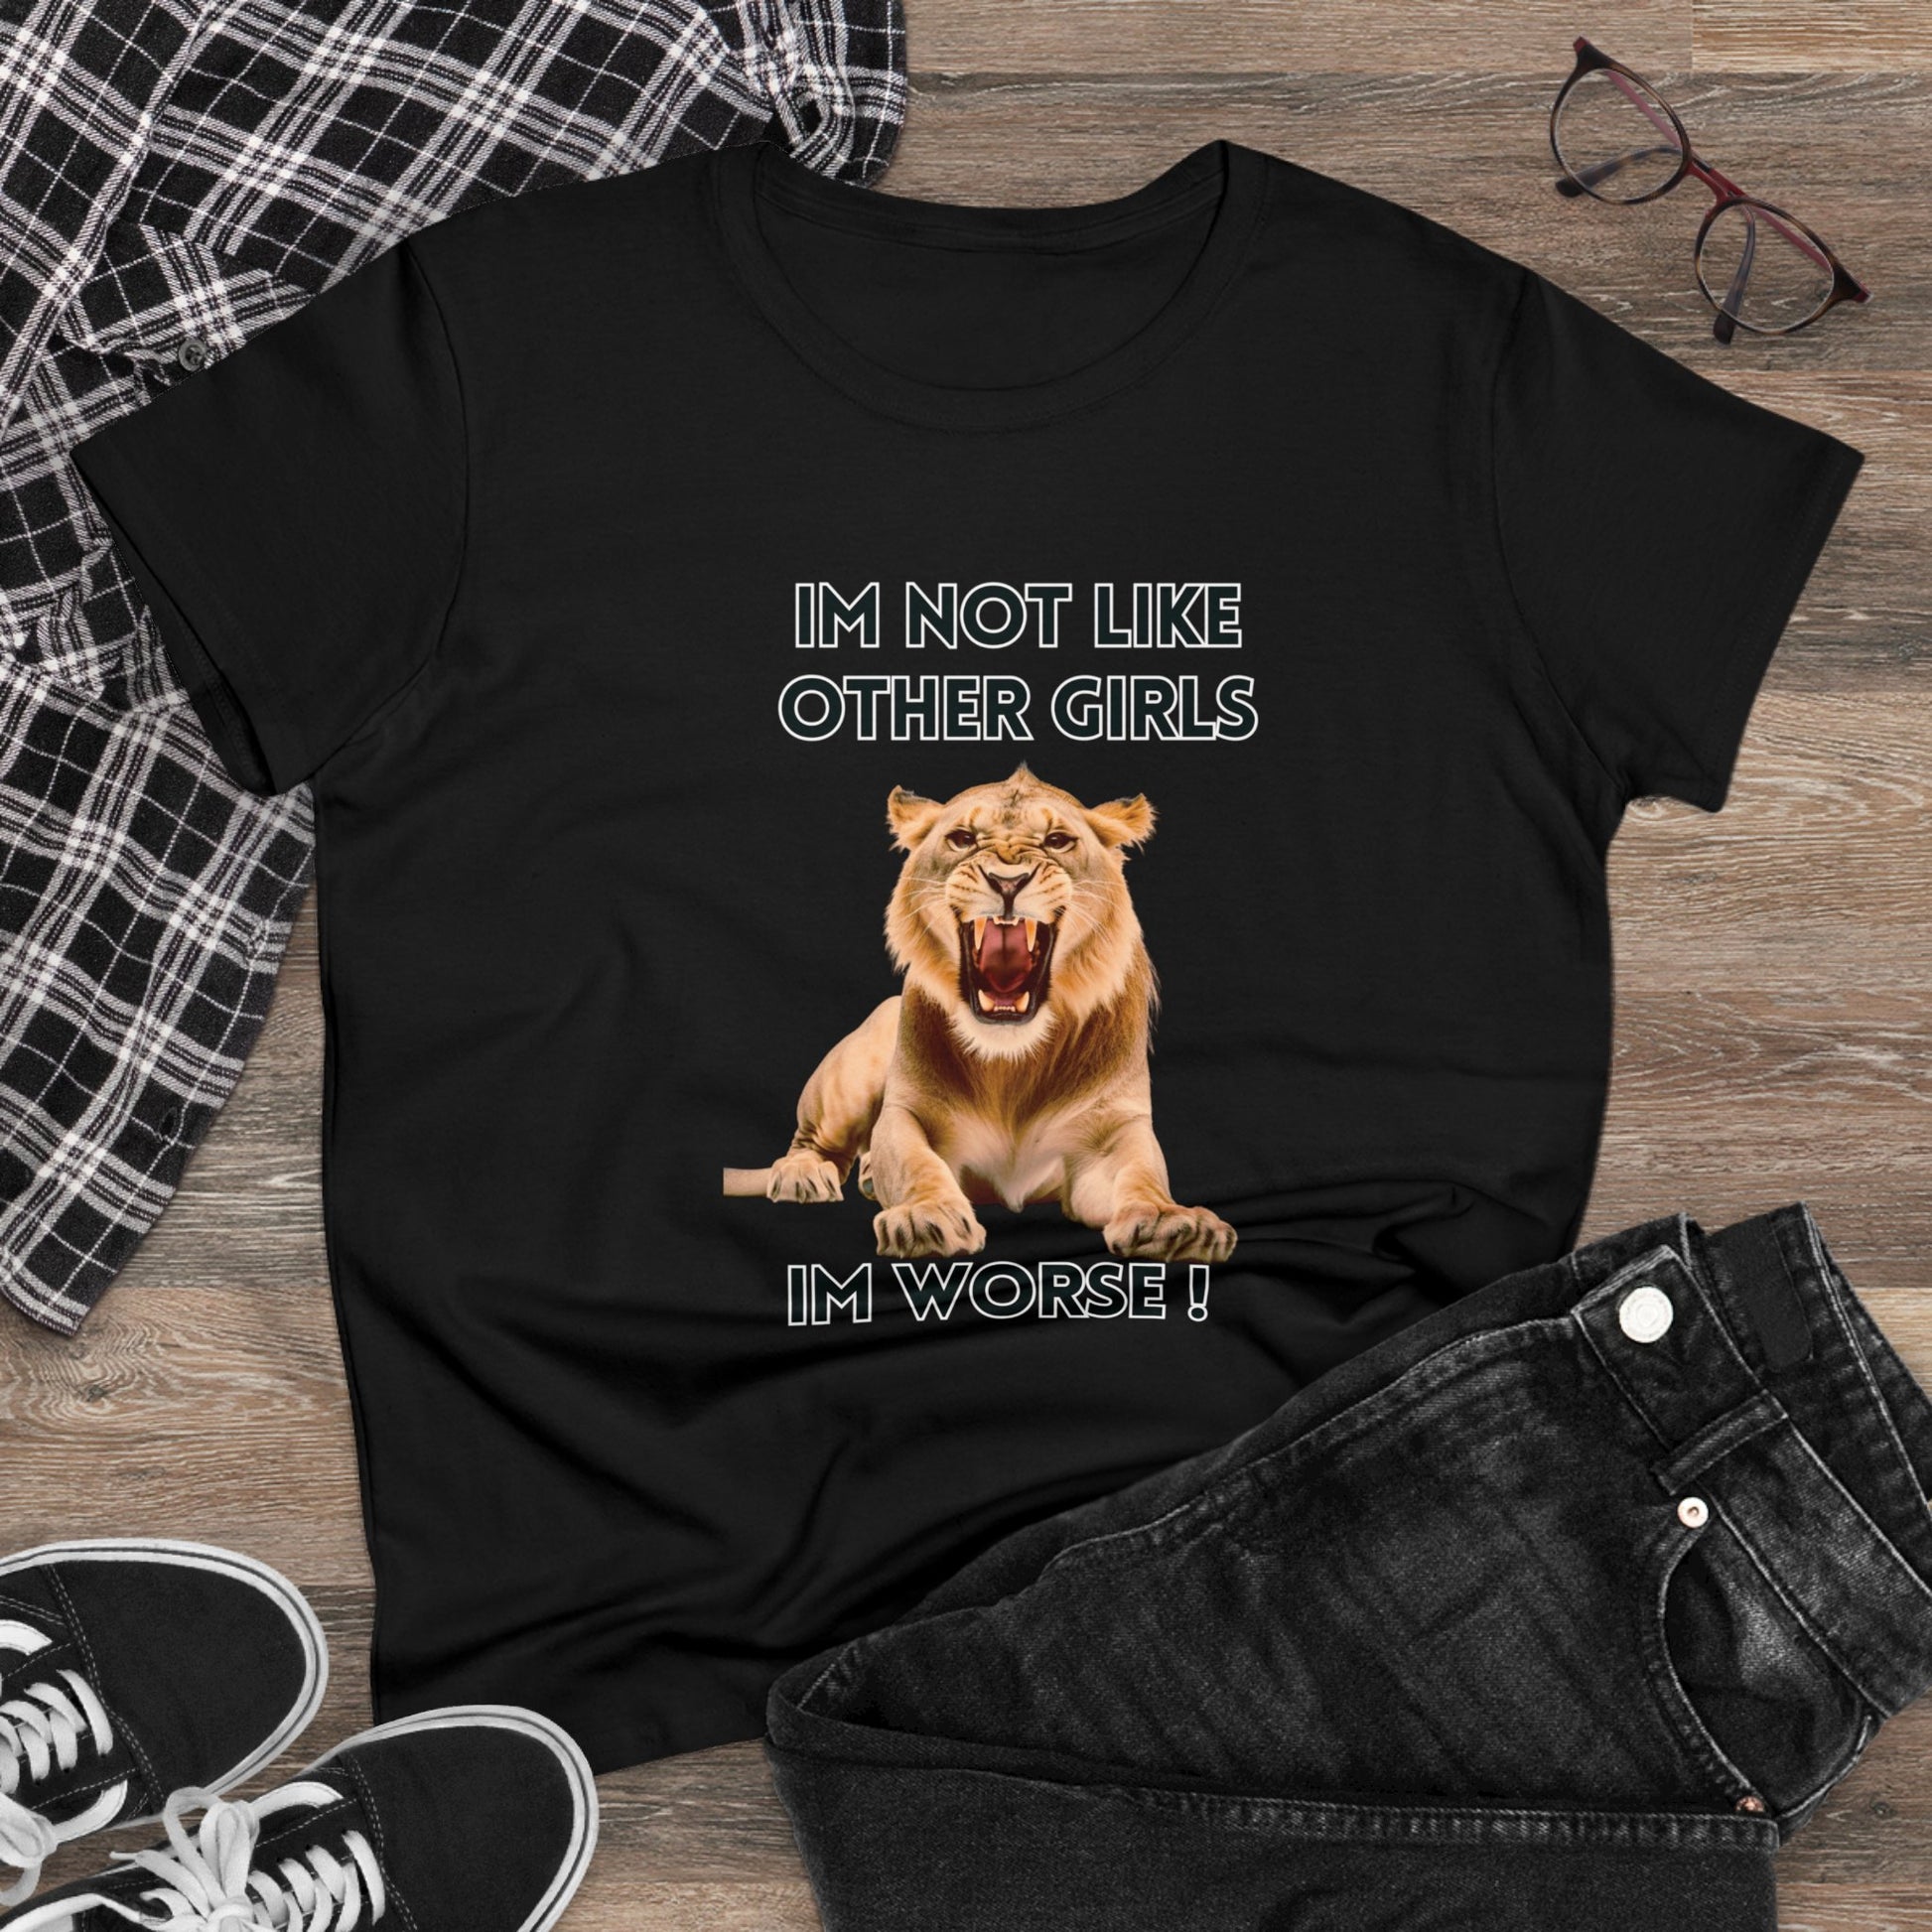 Angry Lion Funny T-Shirt - I'm Not Like Other Girls T-Shirt Black S 